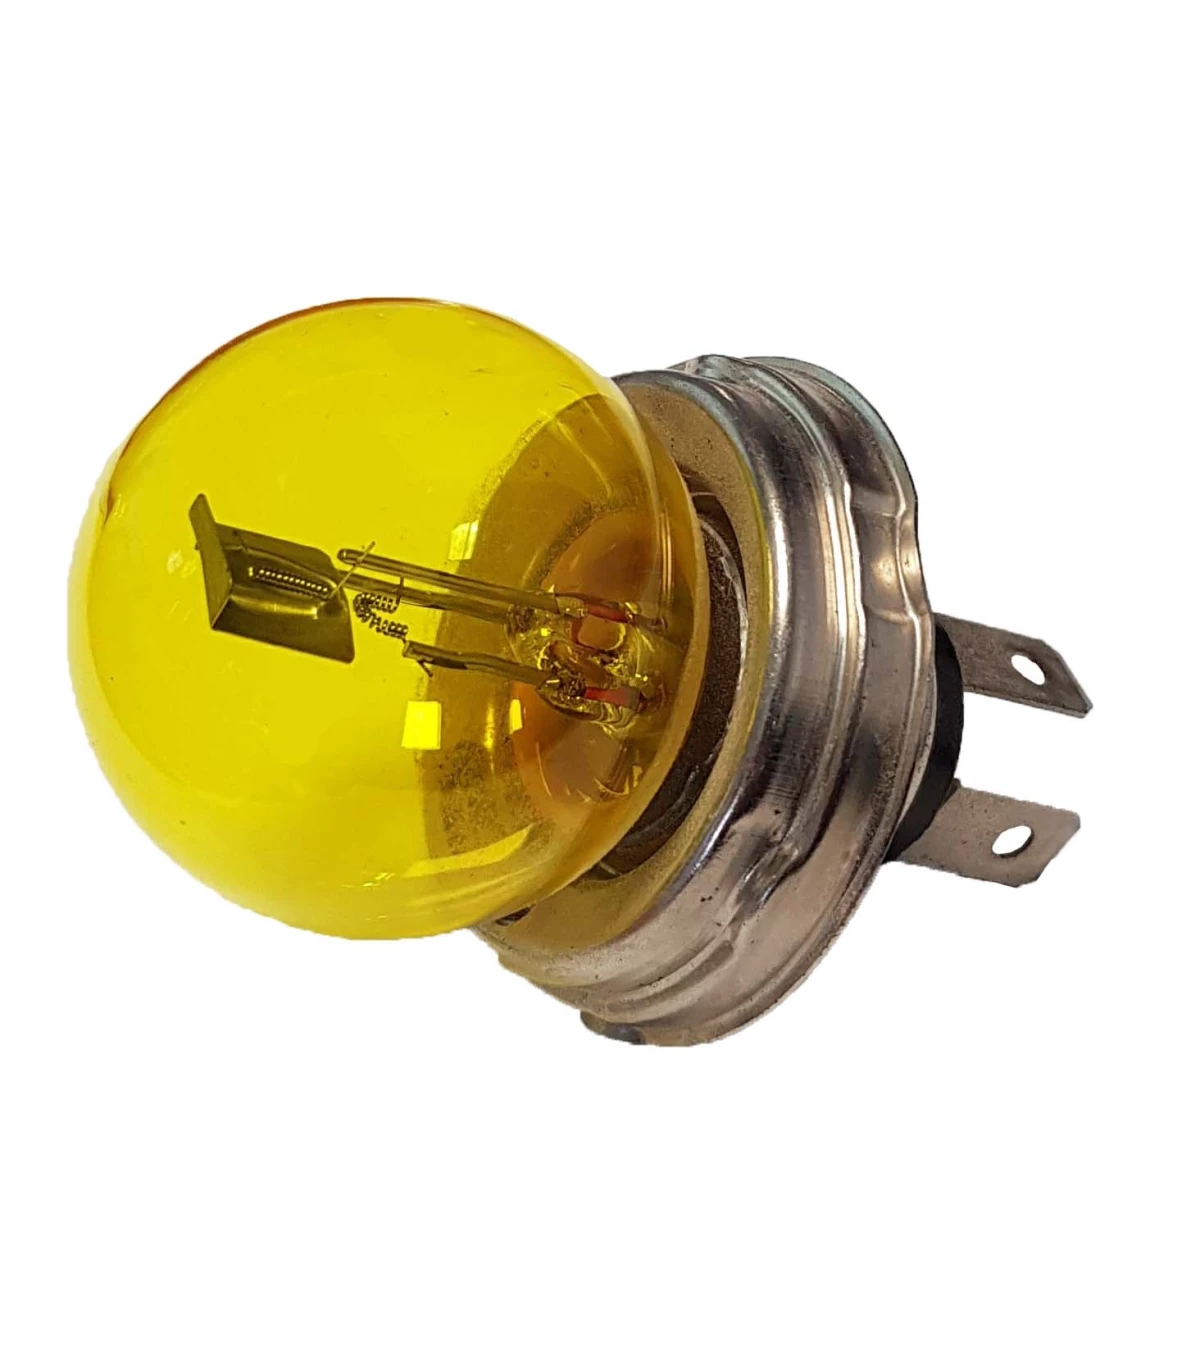 ampoule phare-code NORMA 1122 6V